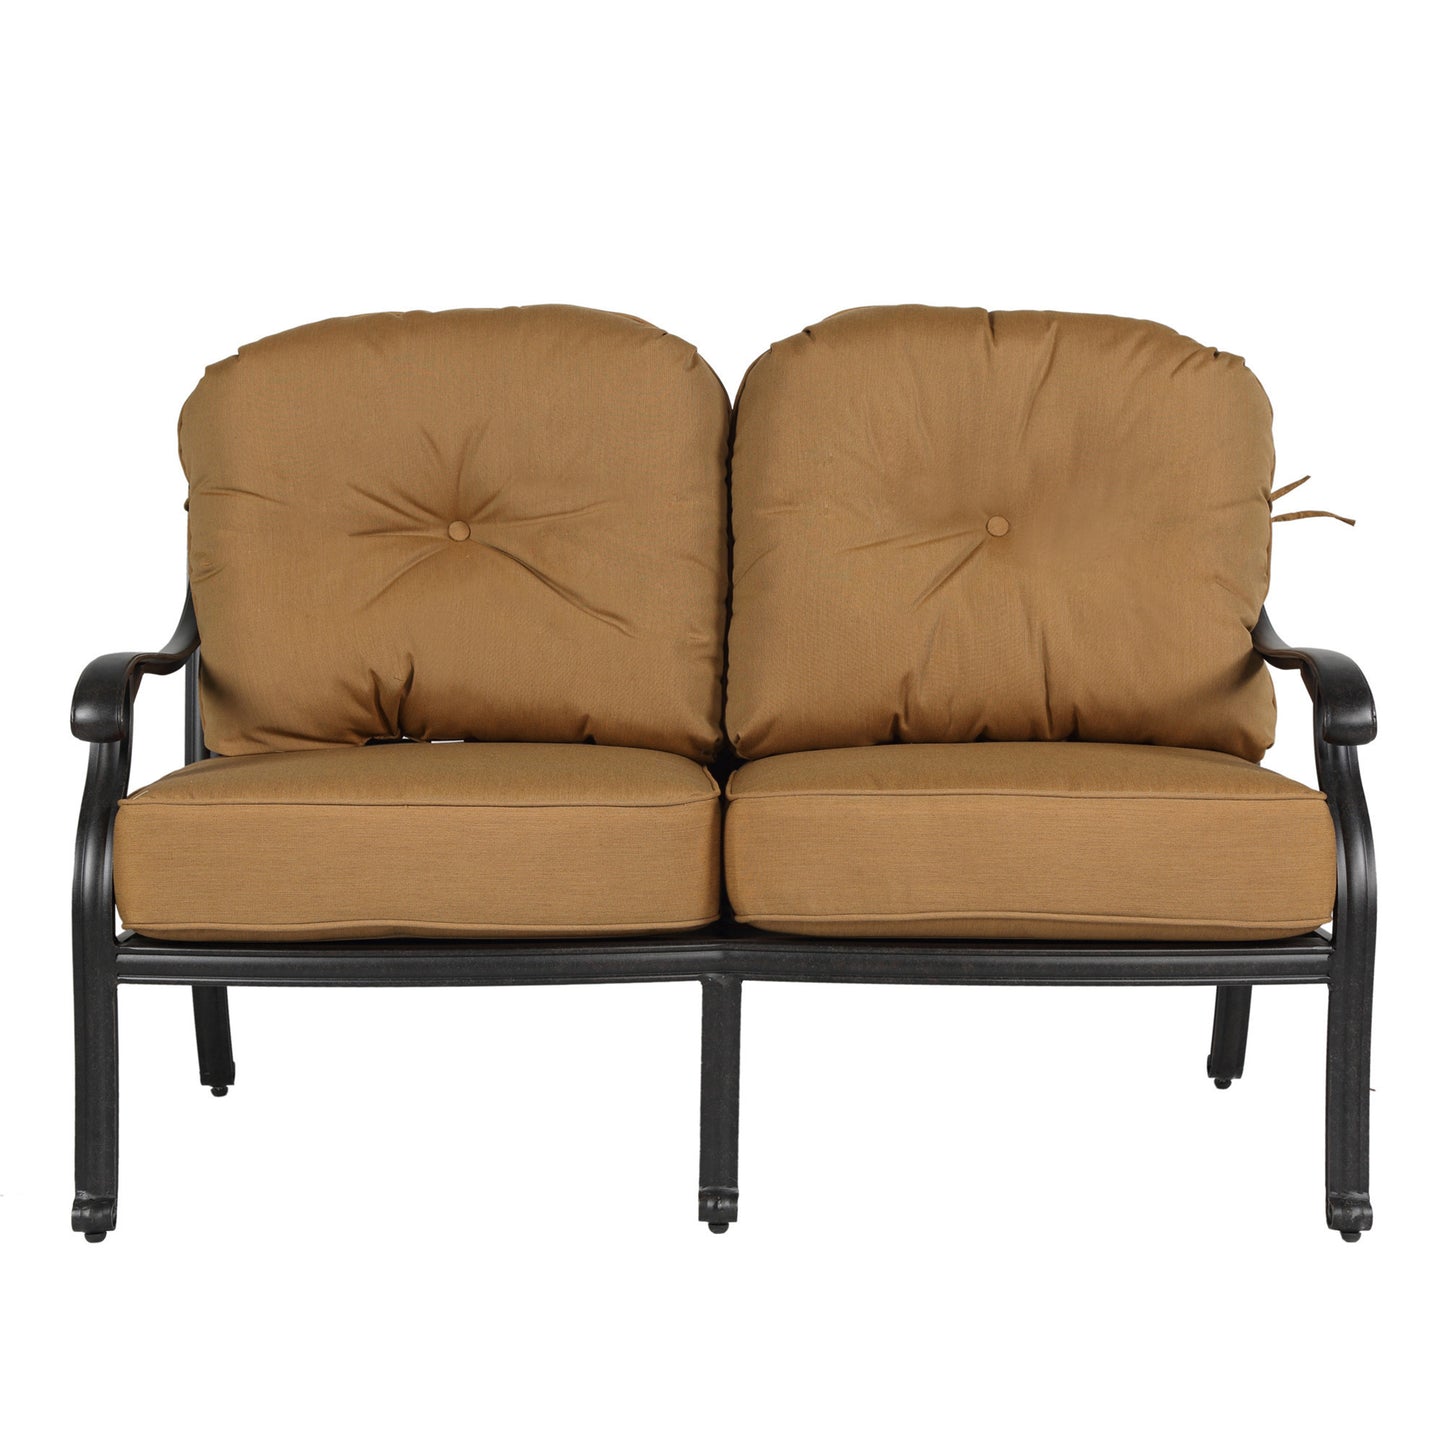 High back loveseat with cushion